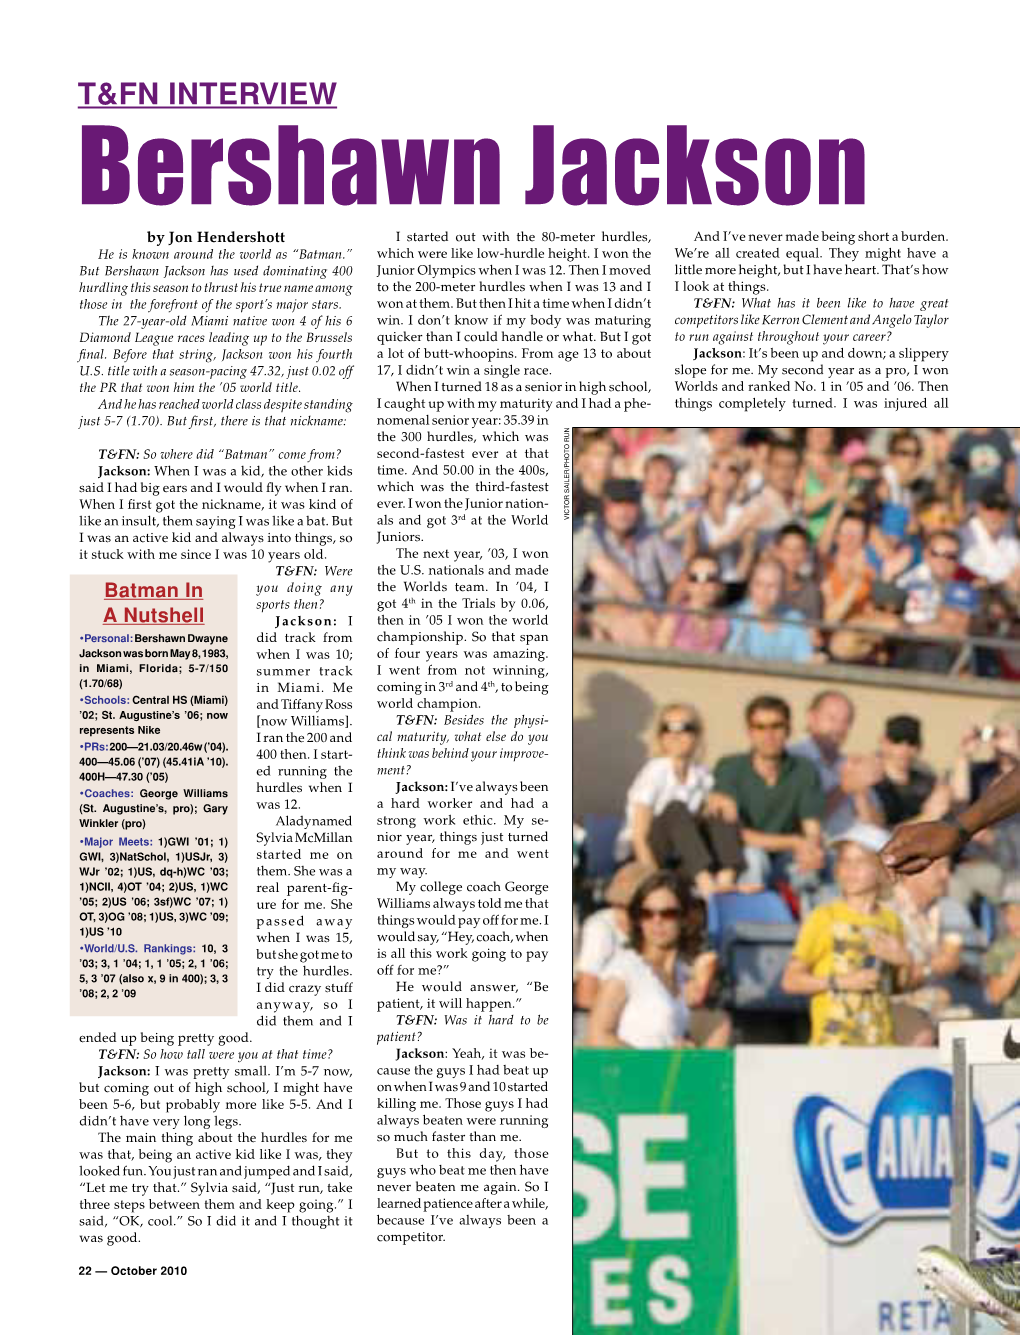 Bershawn Jackson by Jon Hendershott I Started out with the 80-Meter Hurdles, and I’Ve Never Made Being Short a Burden